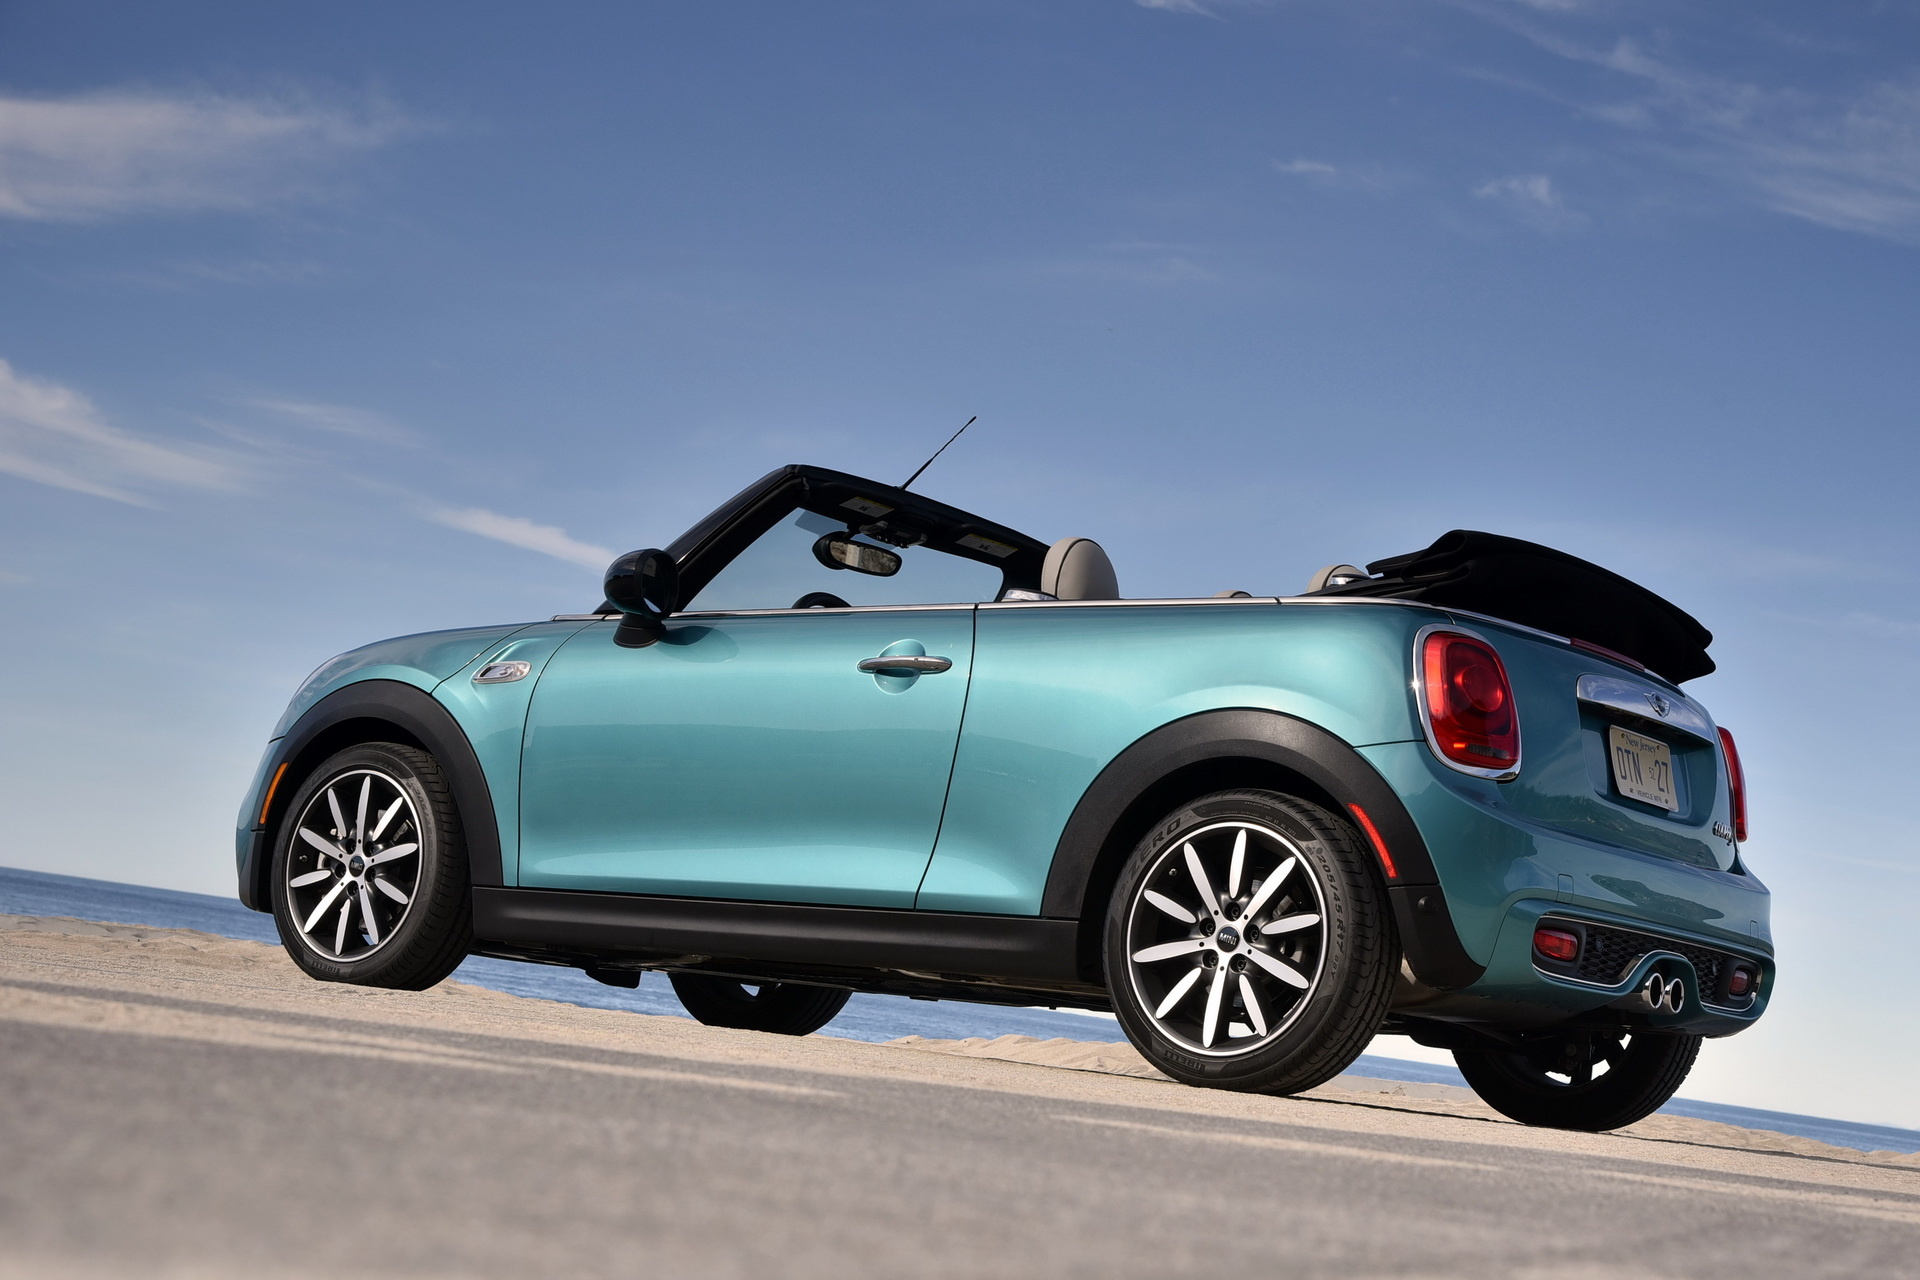 MINI Convertible, Axe for obvious, SUV related reasons, Carscoops, 1920x1280 HD Desktop